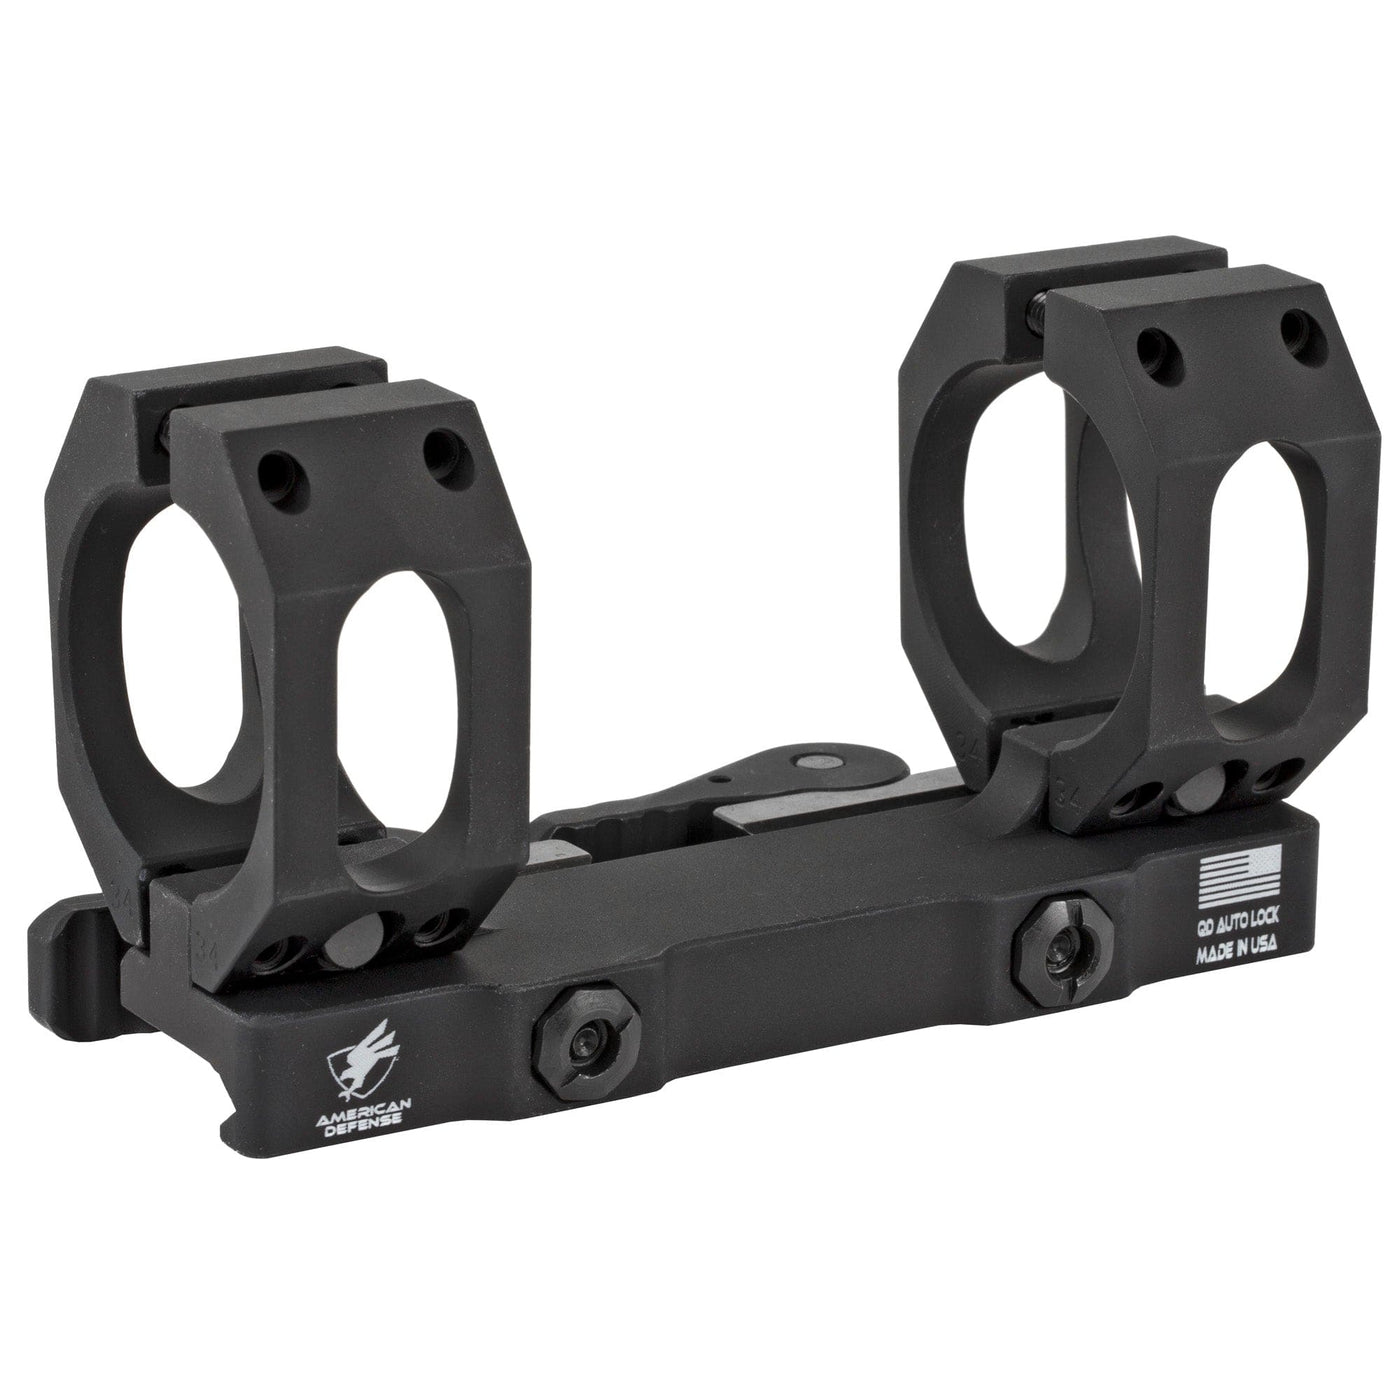 American Defense Amer Def Recon-sl 34mm Q.d. - Tac R Scope Mount Scope Mounts And Rings